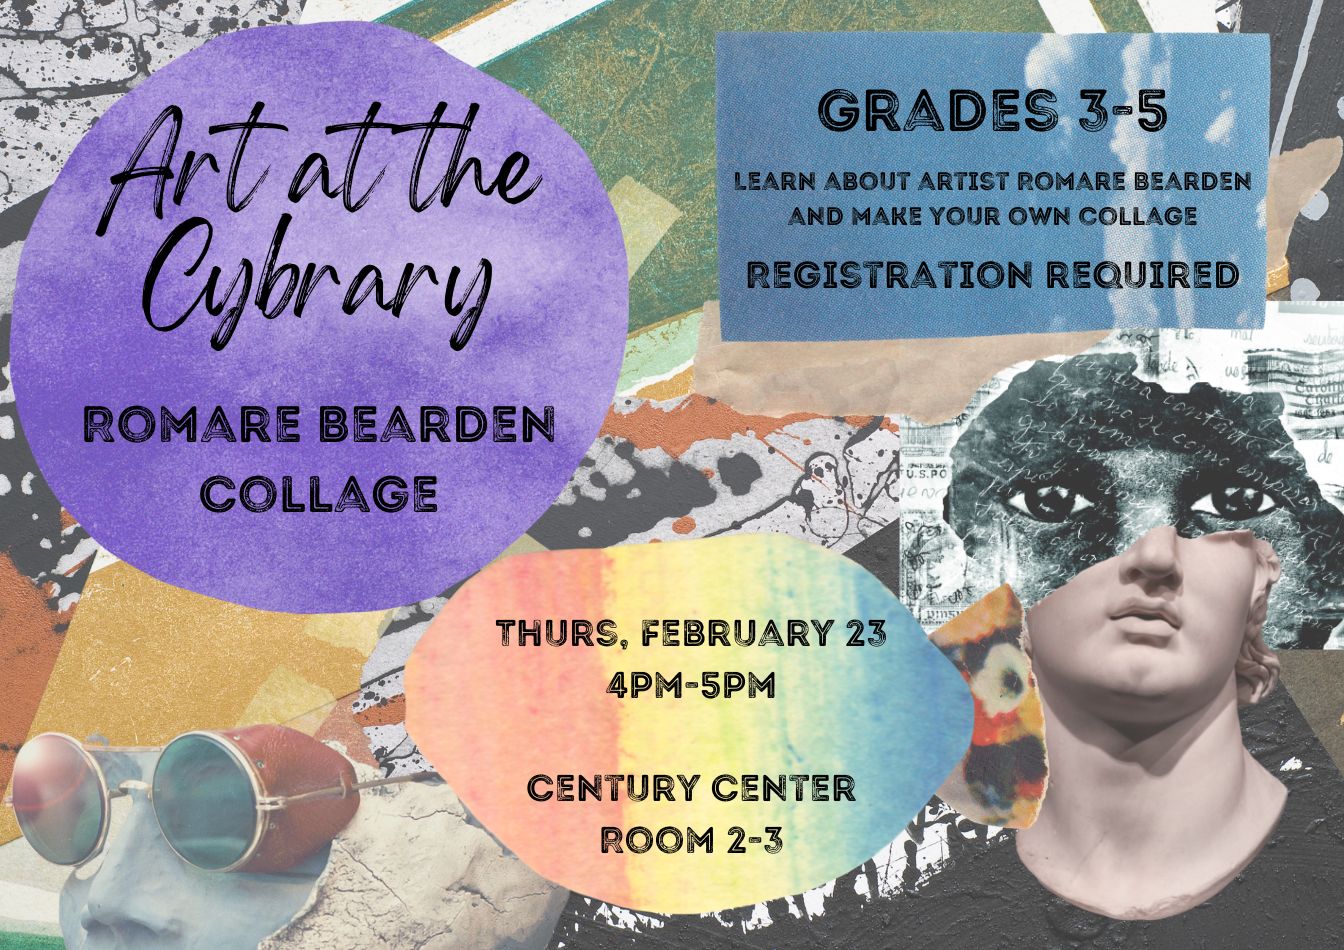 A collage made from colored paper and magazine cutouts. Text: Art at the Cybrary: Romare Bearden Collage. Grades 3-5. Learn about artist Romare Bearden and make your own collage. Thursday, February 23, 4pm-5pm. Registration required.